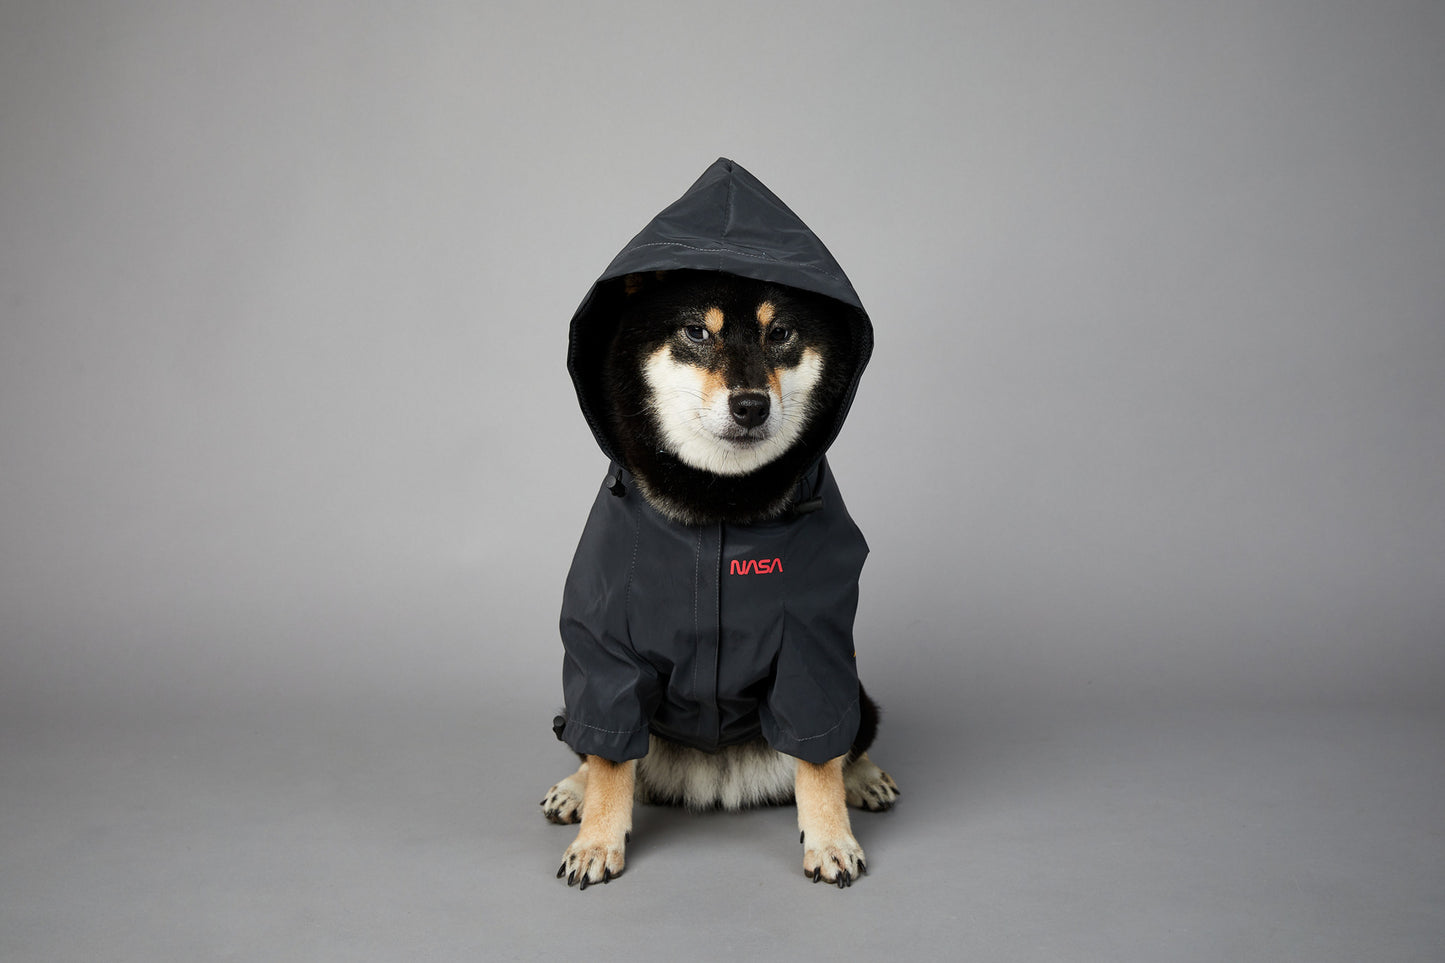 waterproof dog coats with underbelly protection